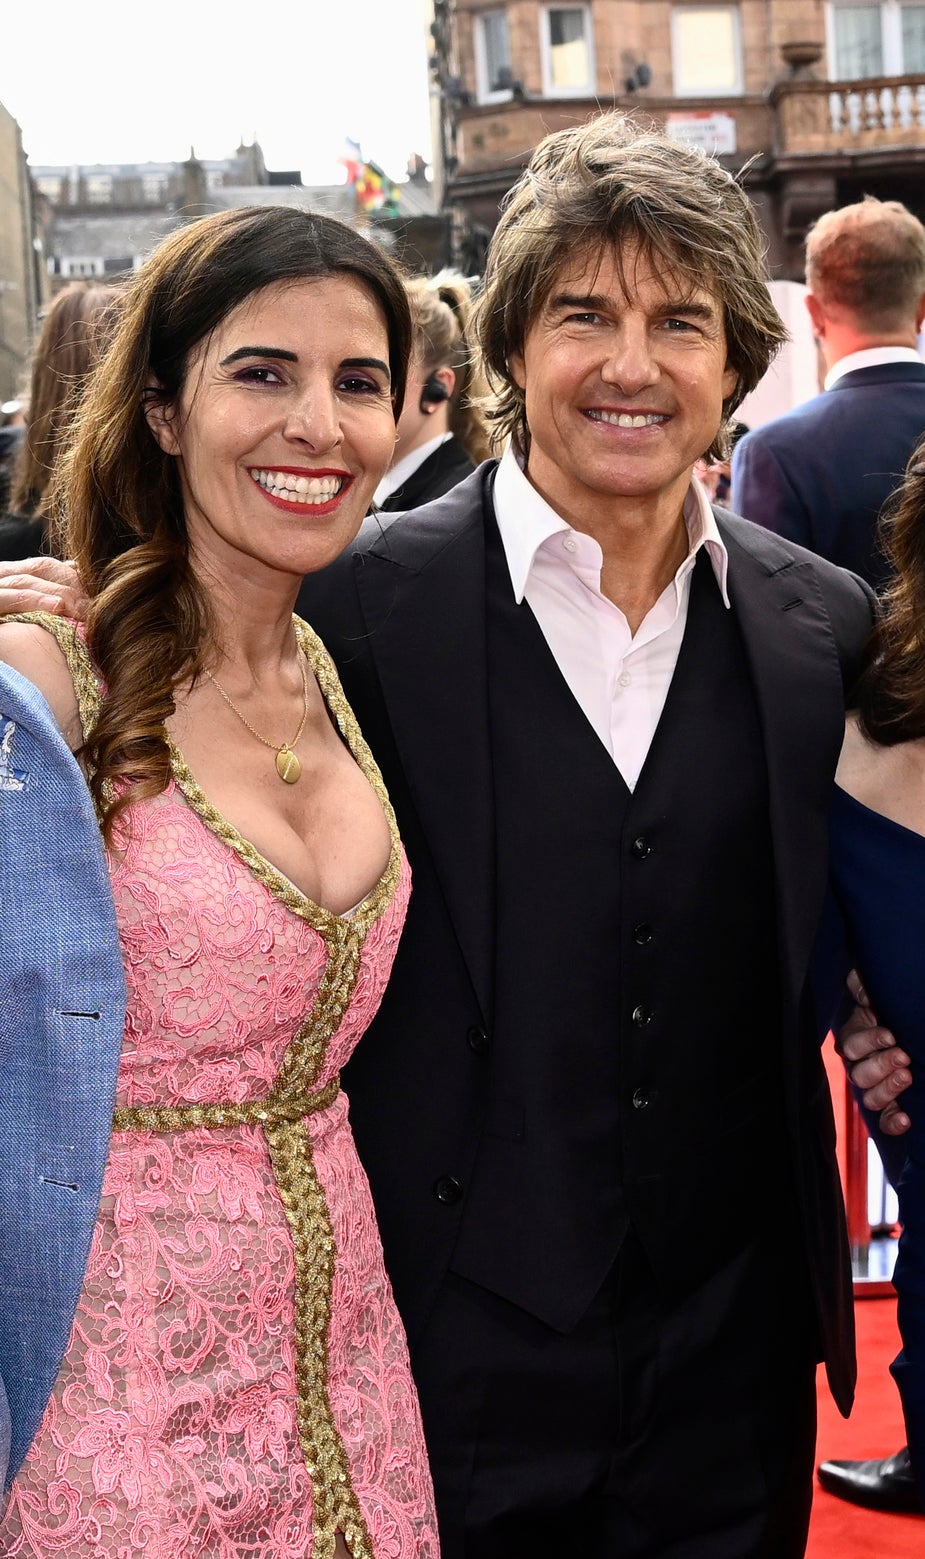 Close-up of Maha and Tom smiling on the red carpet